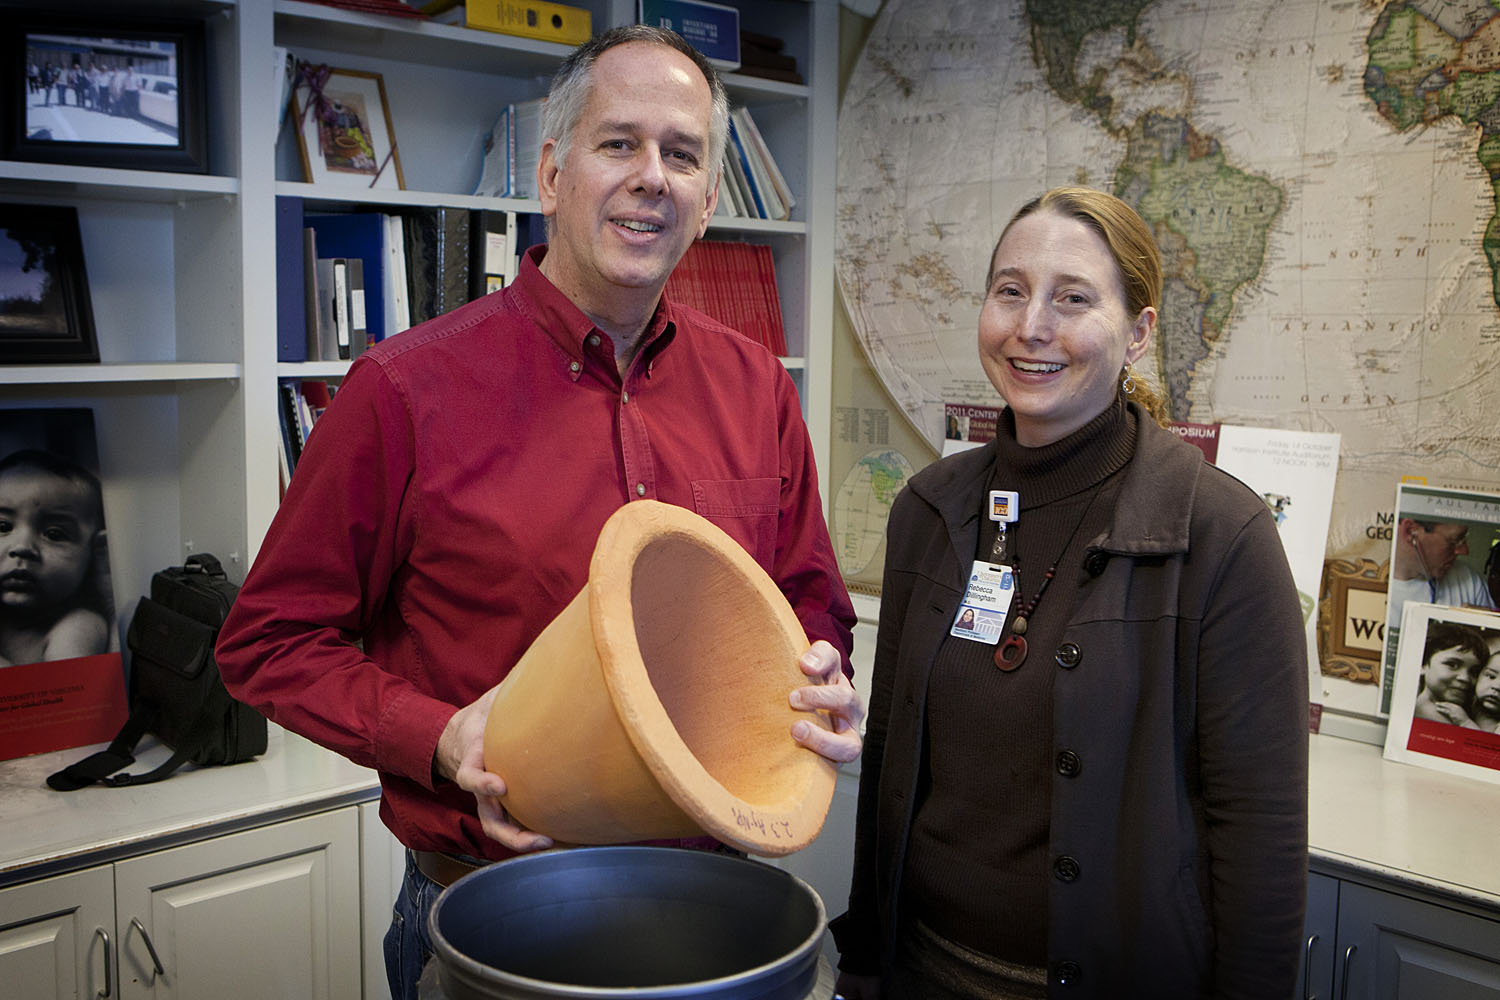 James Smith and Dr. Rebecca Dillingham stand together behind a ceramic water filter